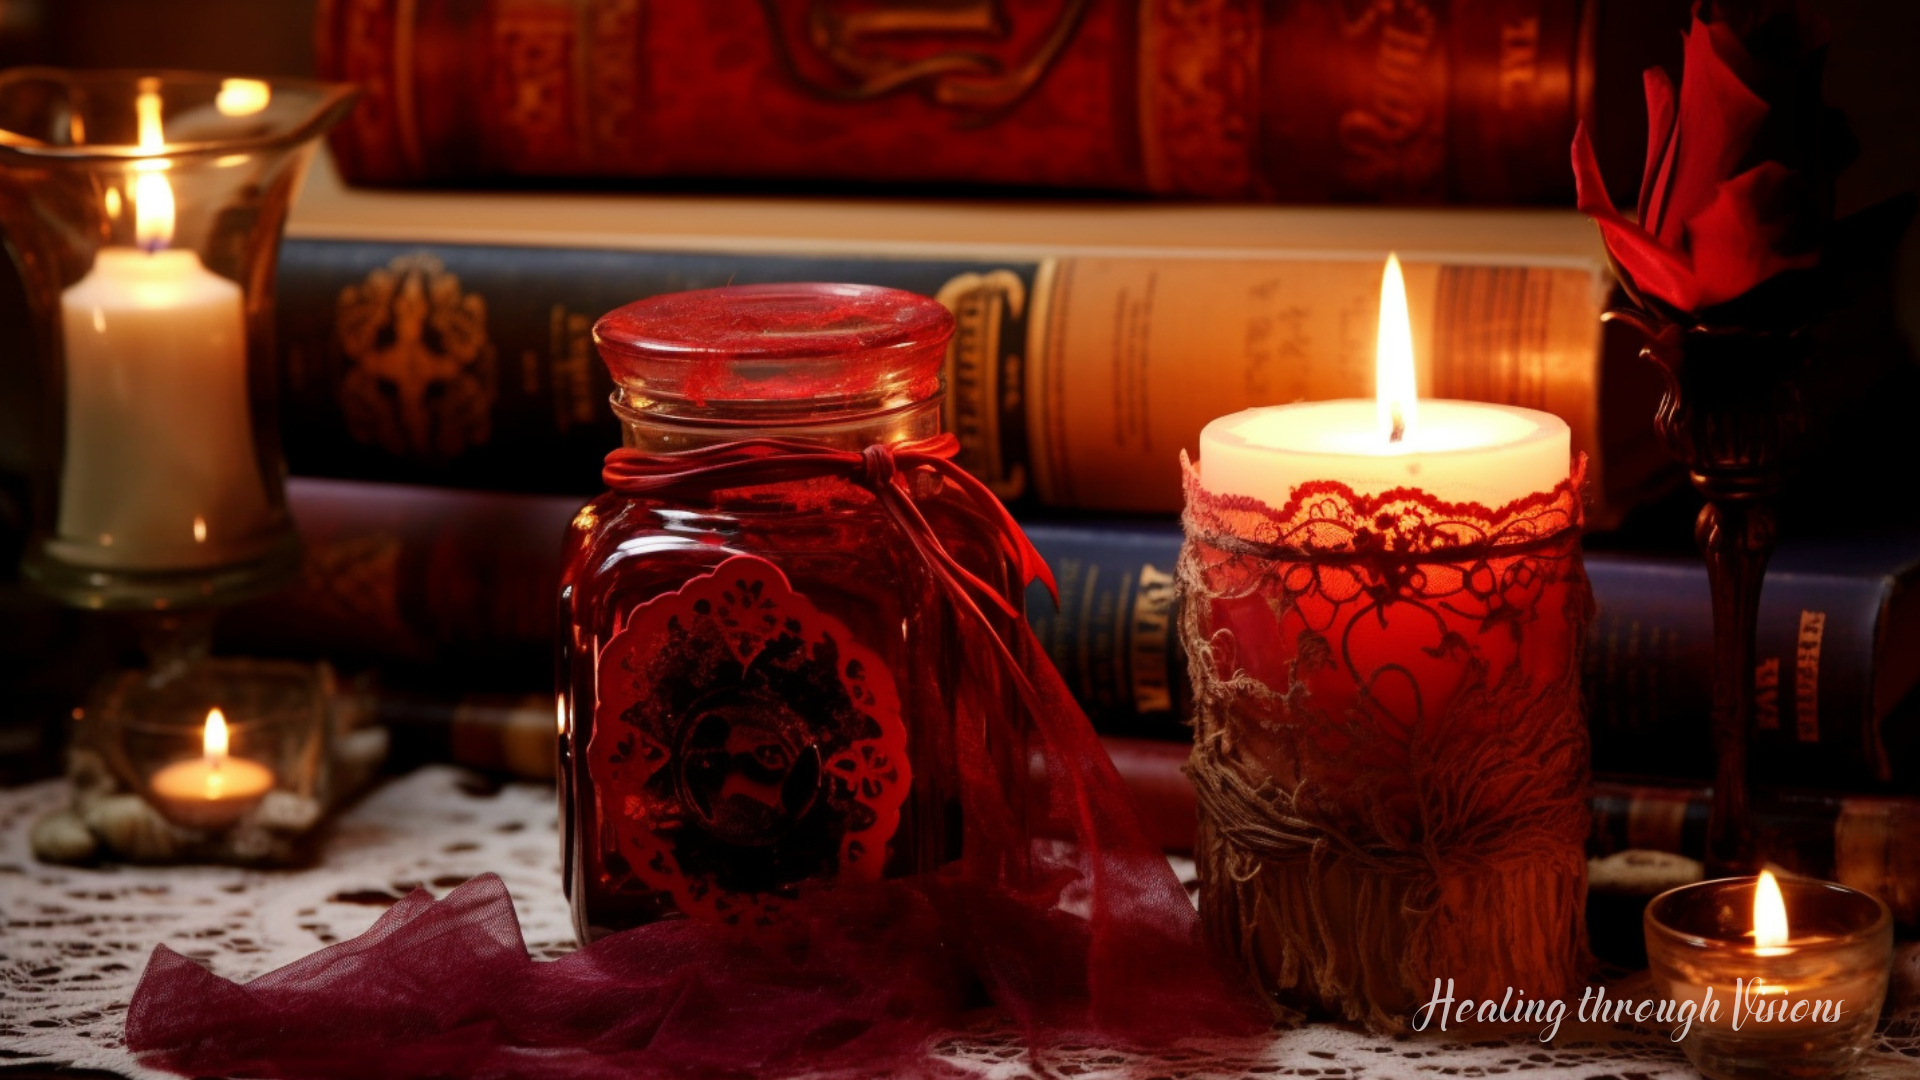 In the cozy parlor of a Hoodoo priestess nestled in the heart of 21st century New Orleans, a captivating scene unfolds. Upon a beautifully adorned table, bathed in the warm glow of flickering candles, a single love jar spell takes center stage. A glass jar, elegantly embellished with intricate lace and tied with a crimson ribbon, emanates an aura of magnetic energy. Inside, a symphony of vibrant hues intertwines as rose petals, jasmine blossoms, and fragrant herbs create a kaleidoscope of love's essence. Glistening gemstones, carefully chosen for their metaphysical properties, nestle among the botanical treasures, radiating their captivating allure. The air carries a heady scent of passion and enchantment, as the delicate fragrance of essential oils mingles with the lingering wisps of sacred incense.